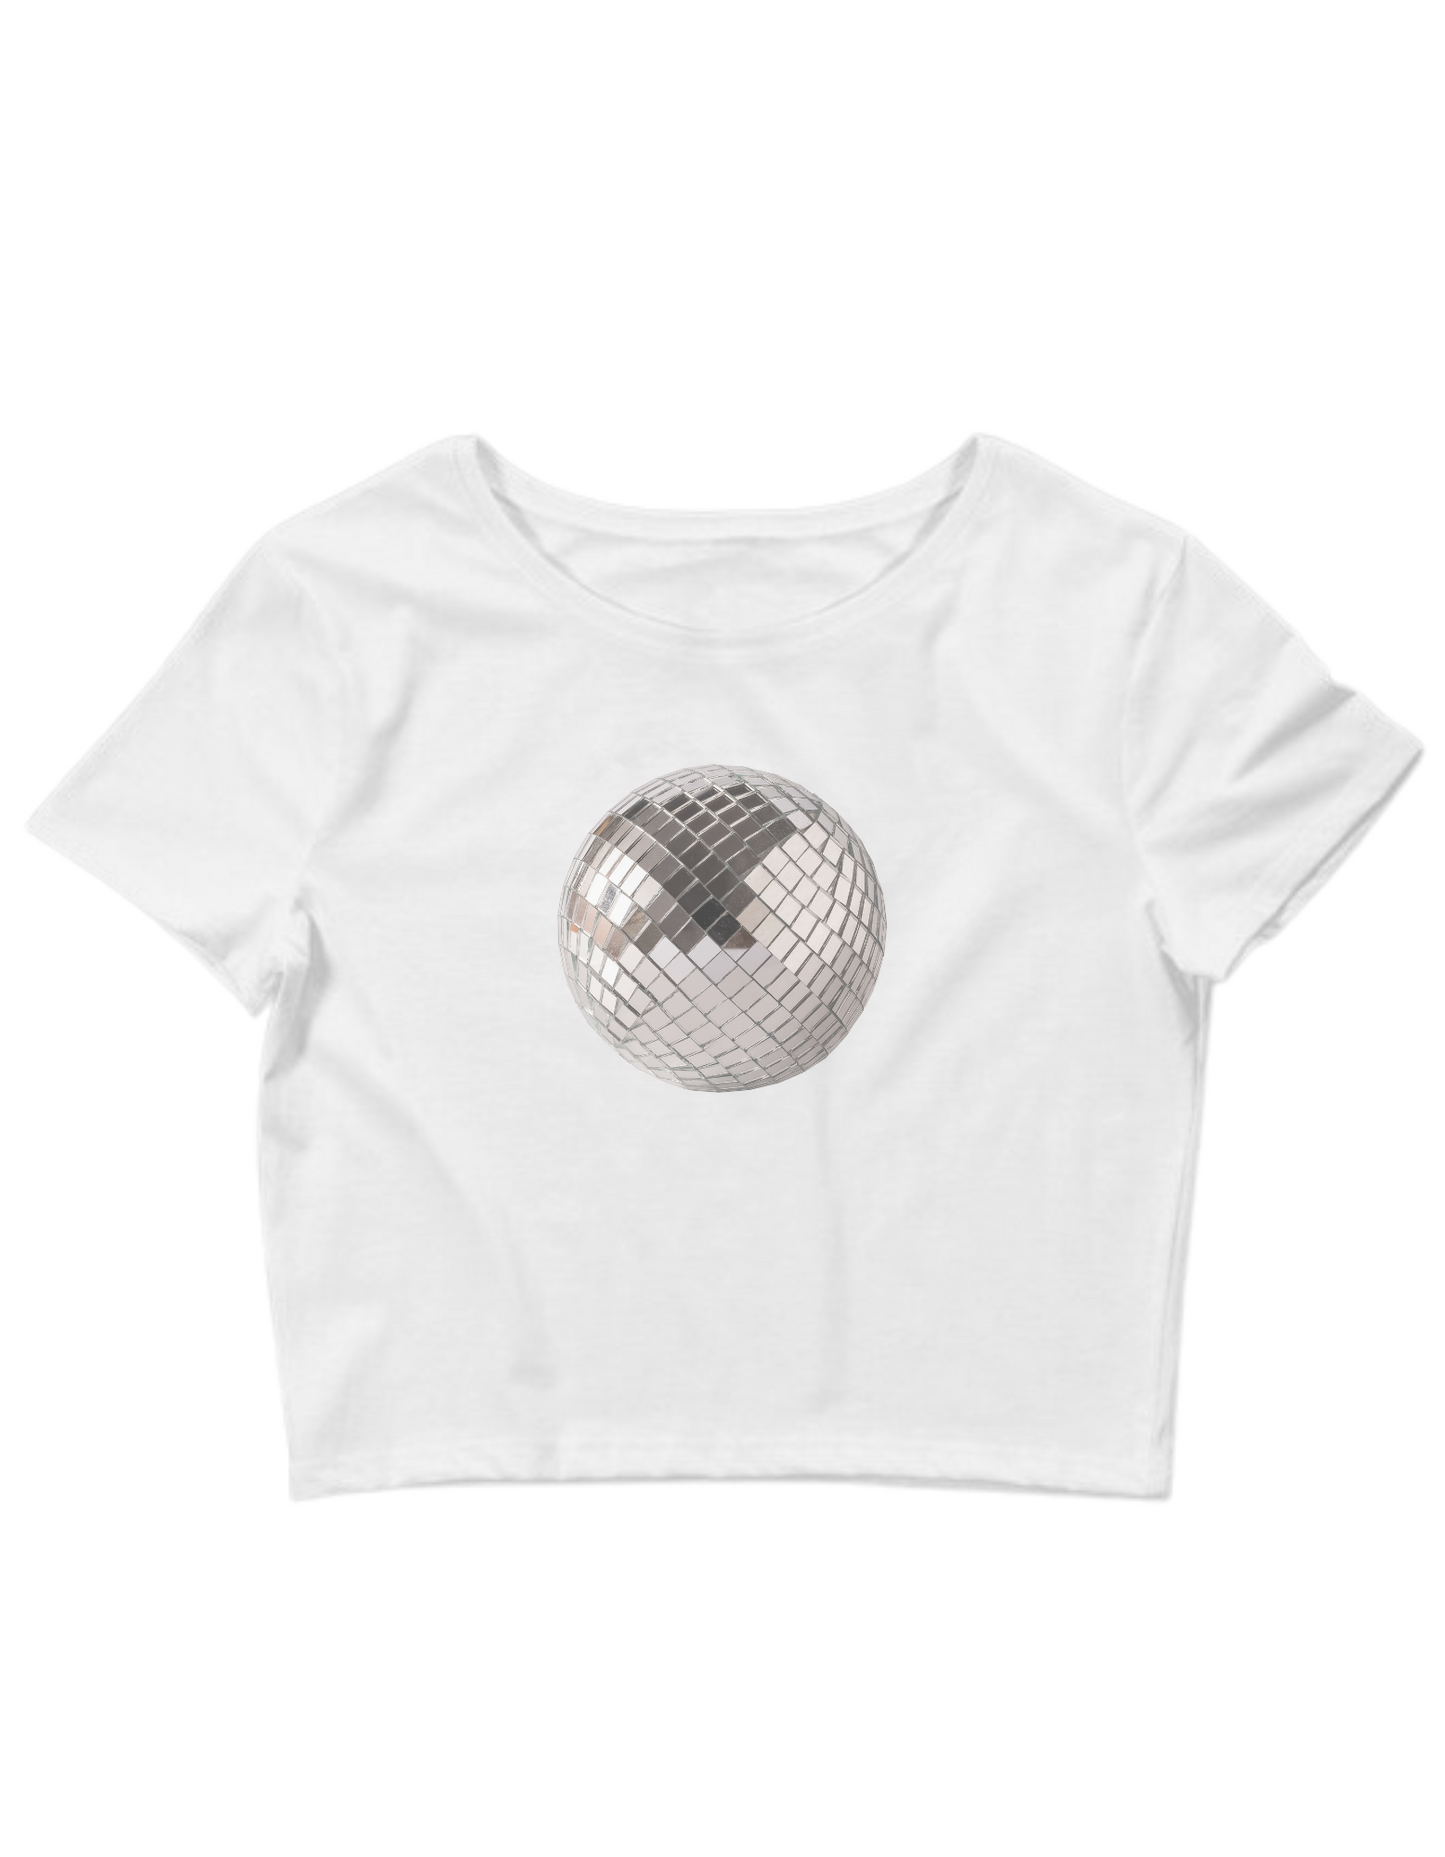 Printed 'Disco Ball' Cropped, Short Sleeve, Adult Female, Baby Tee